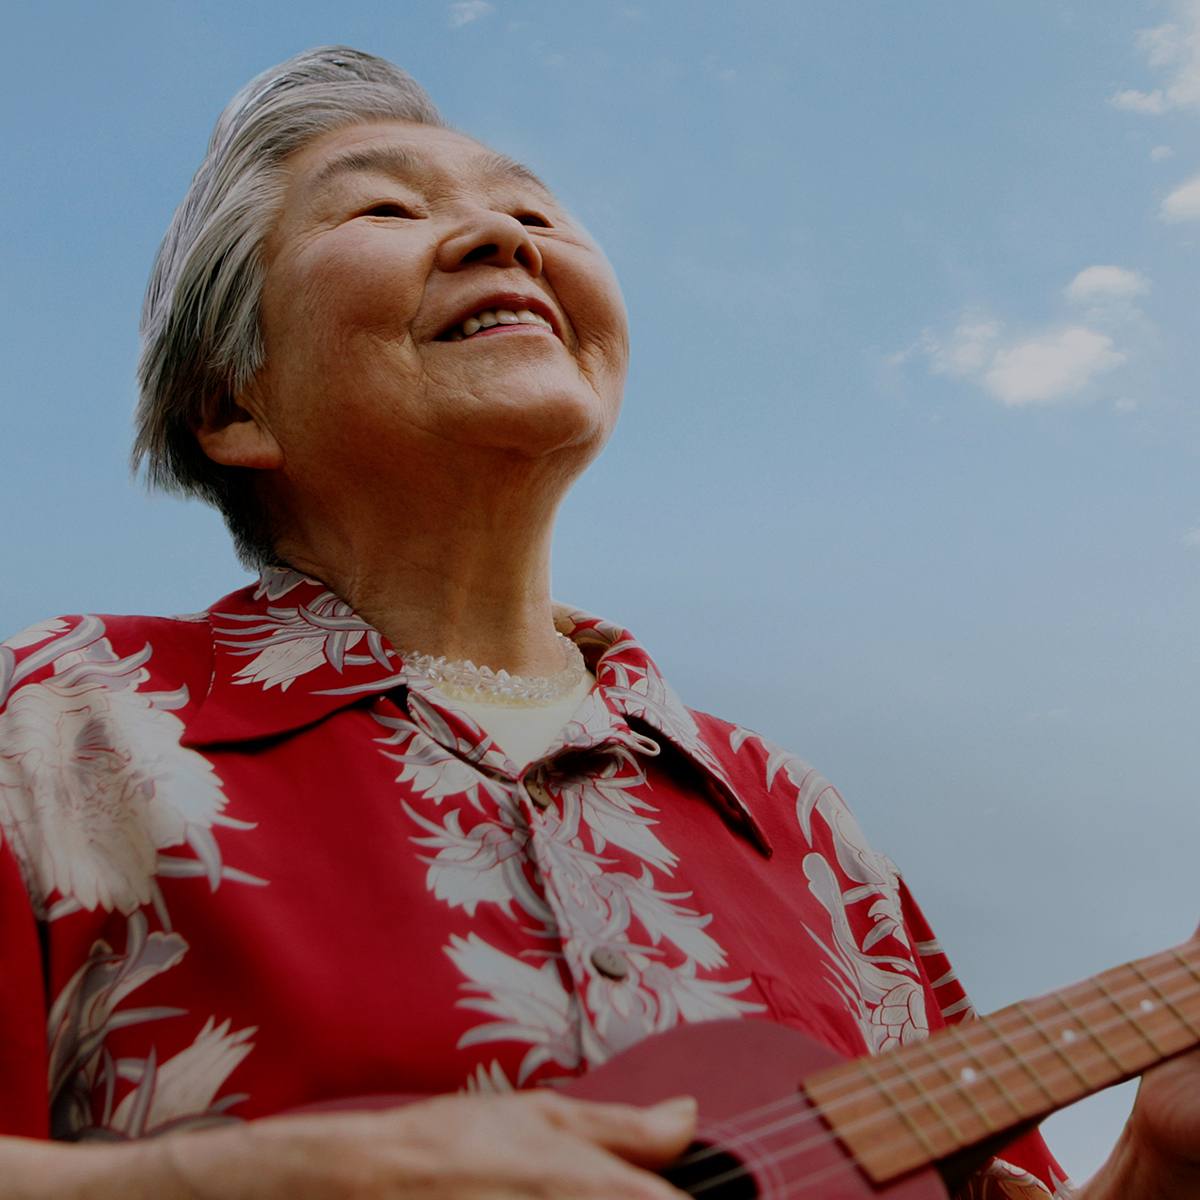 a person smiling and playing a ukelele